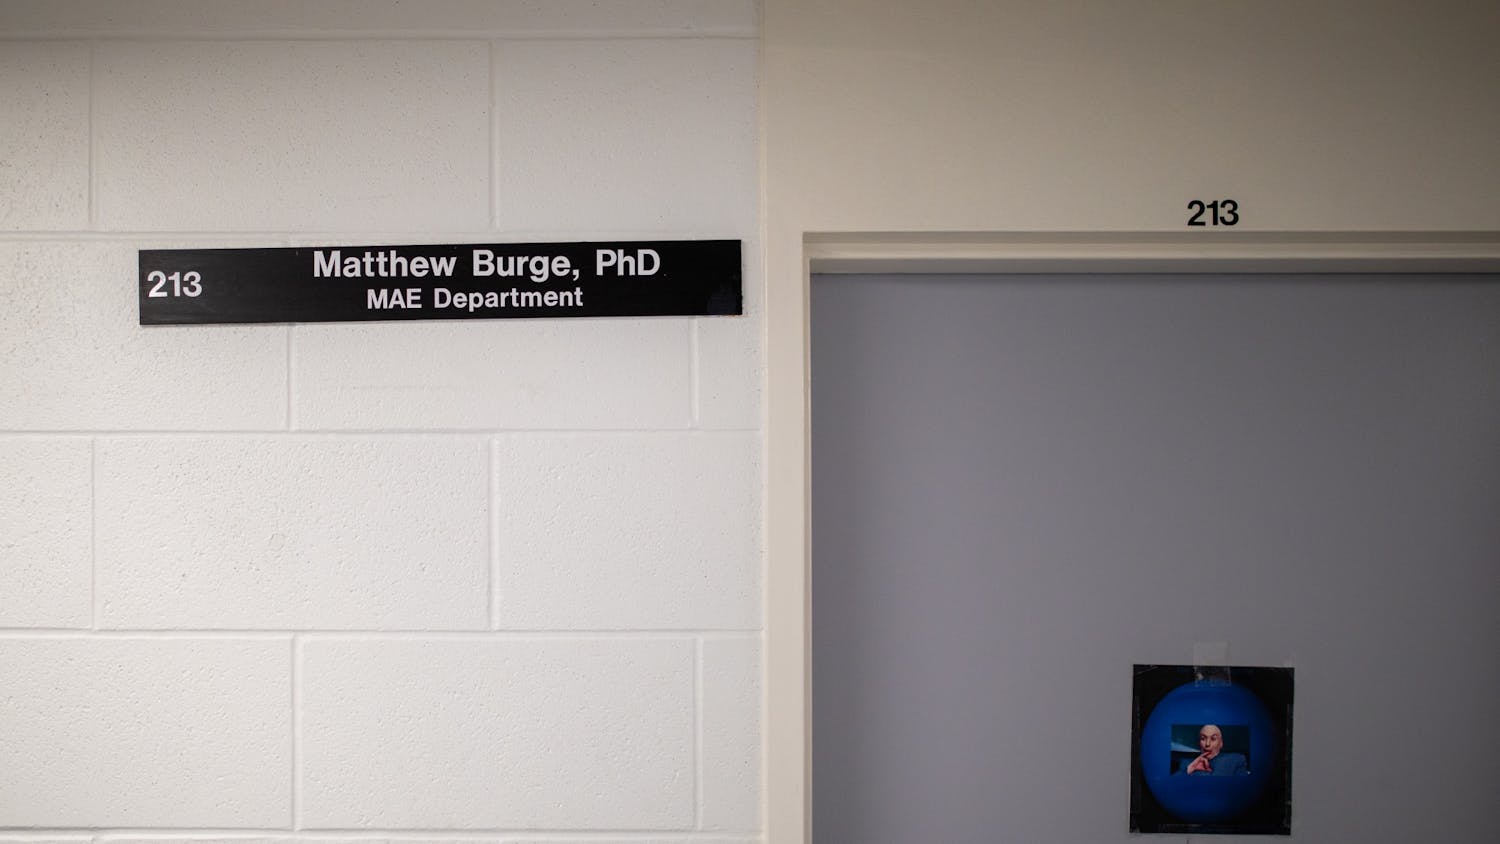 Professor Matthew Burge answered a phone call from The Spectrum late last month but hung up after learning he was speaking with a Spectrum editor.